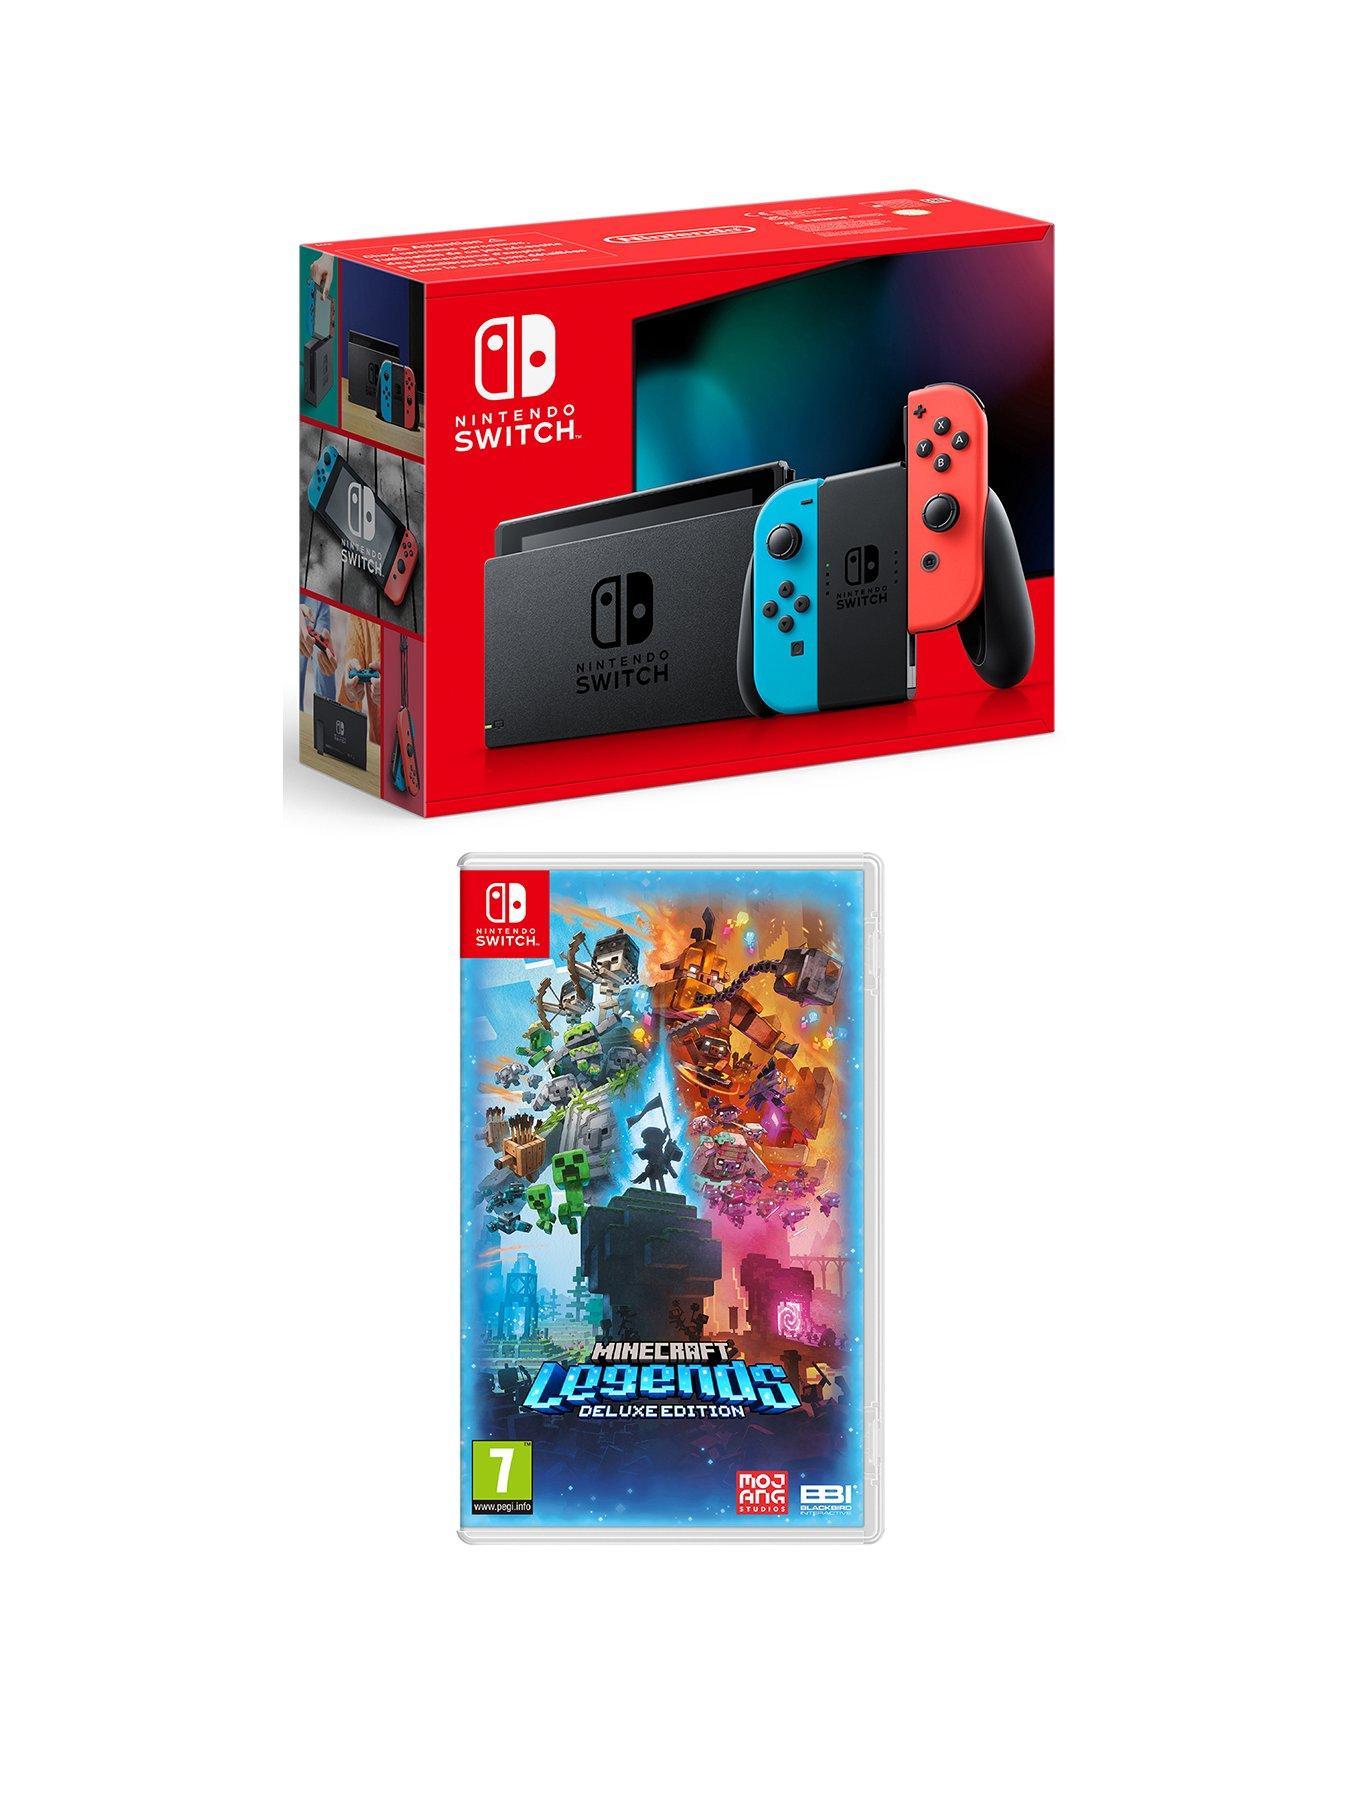 Legends Neon Nintendo with Edition Deluxe Minecraft Console Switch